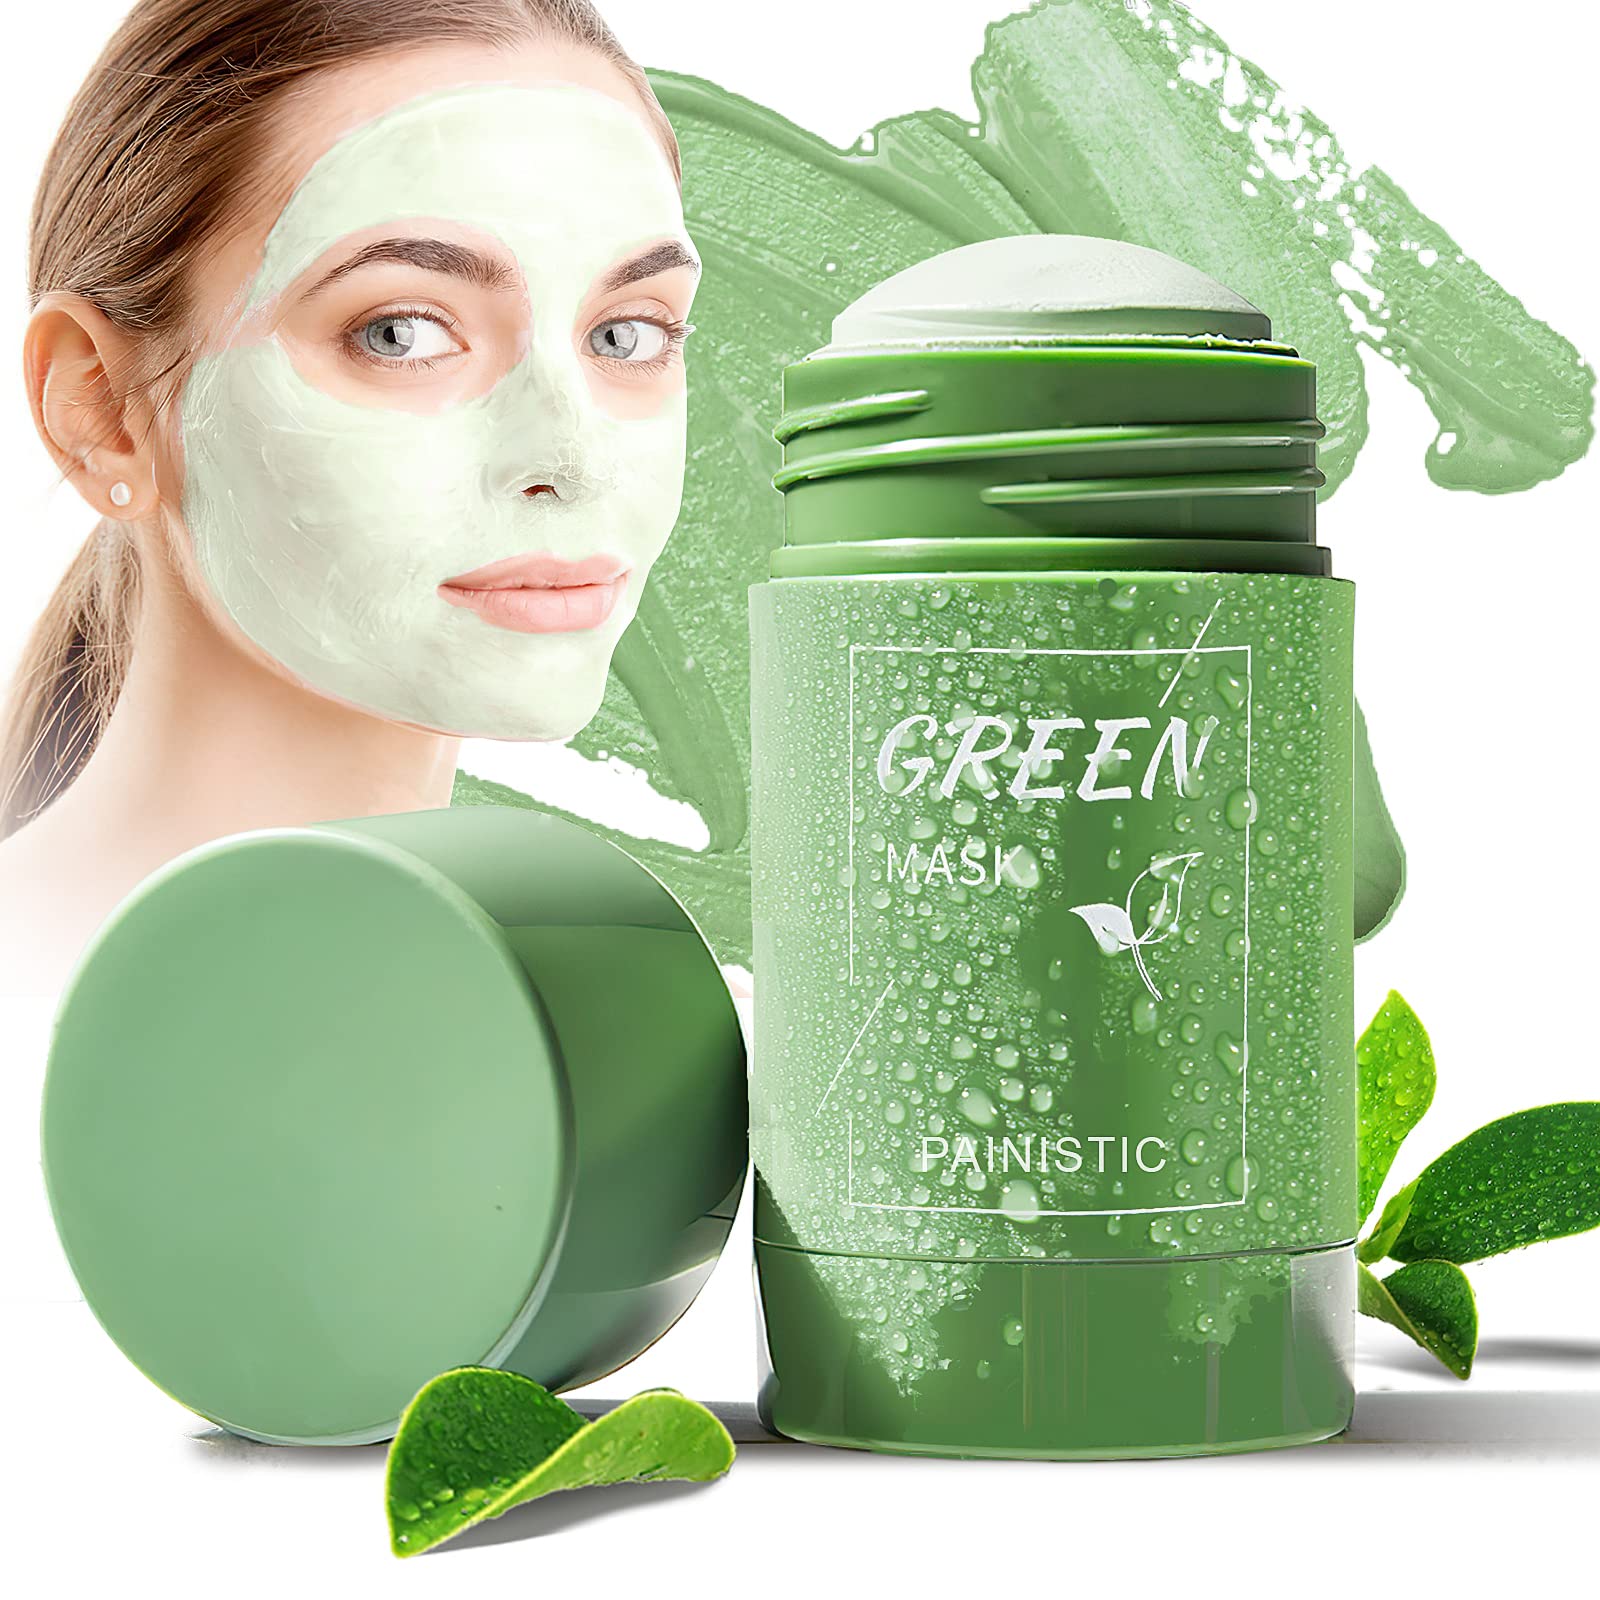 PAINISTIC Green Tea Mask Stick Blackhead Remover Purifying Oil Control  Clean Solid Face Clay Mask Moisturizing Acne Deep Pore Cleansing for All  Skin Types of Men and Women 1 Count (Pack of 1)